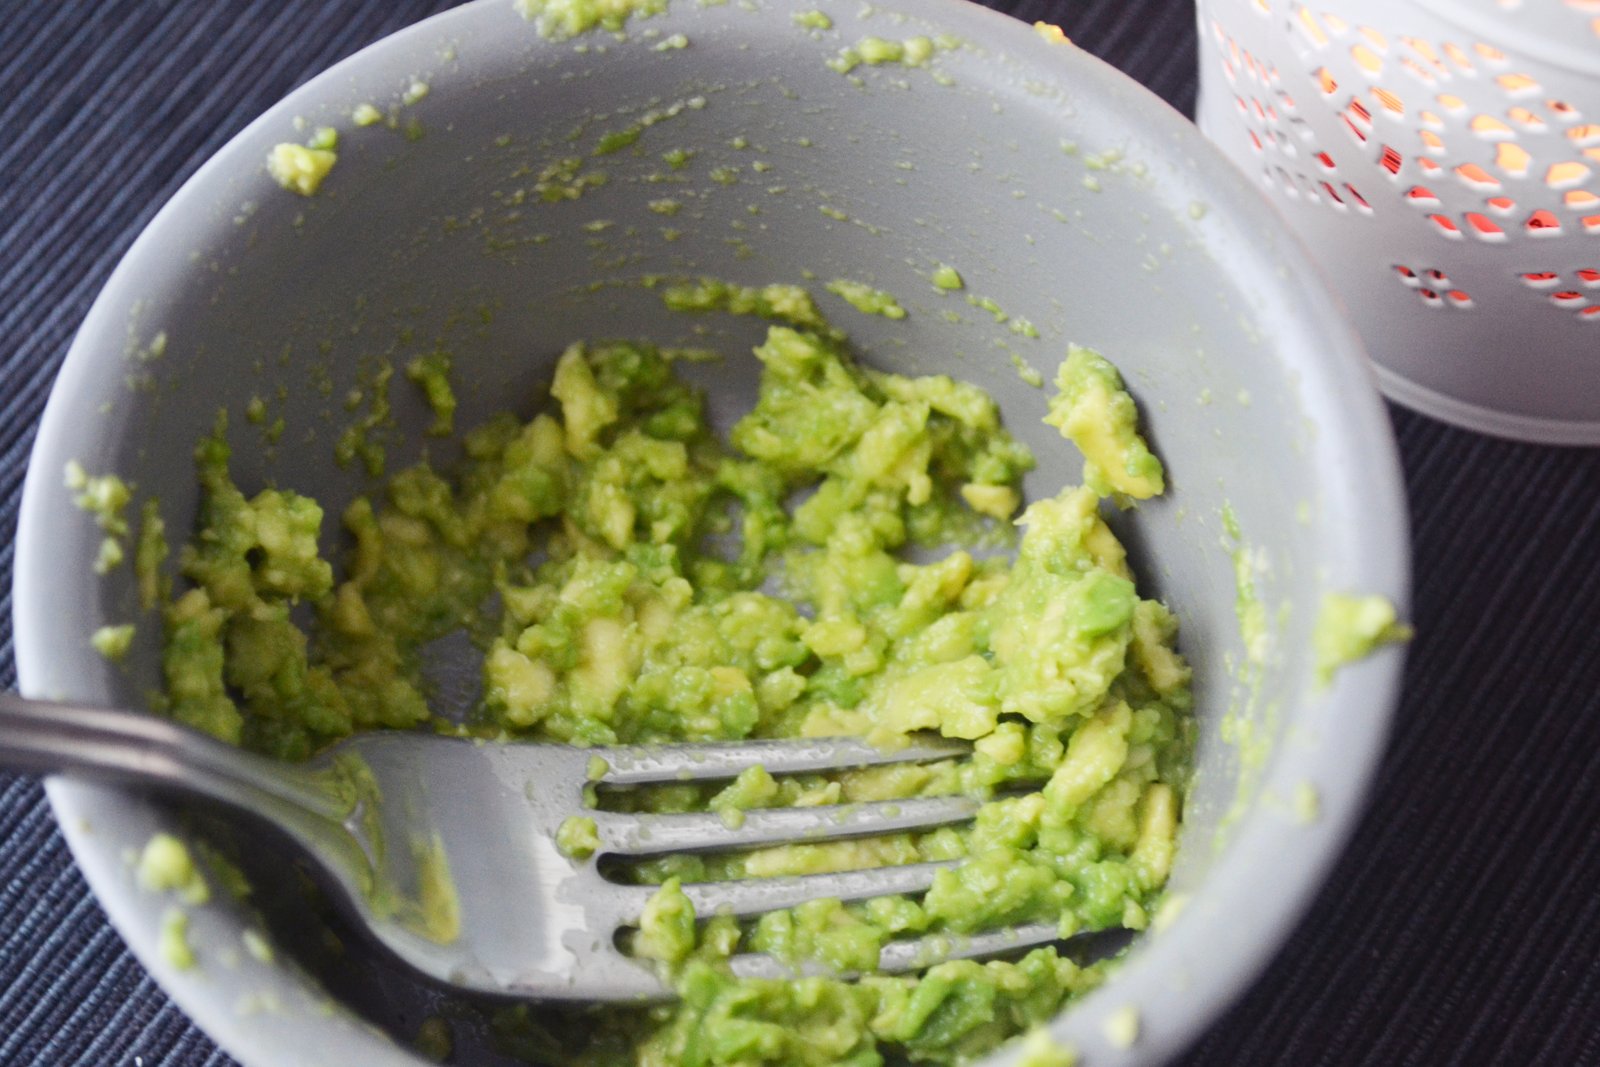 avocado the much blender  hydrating face  mask blend You  you as can diy to as can. use Mash